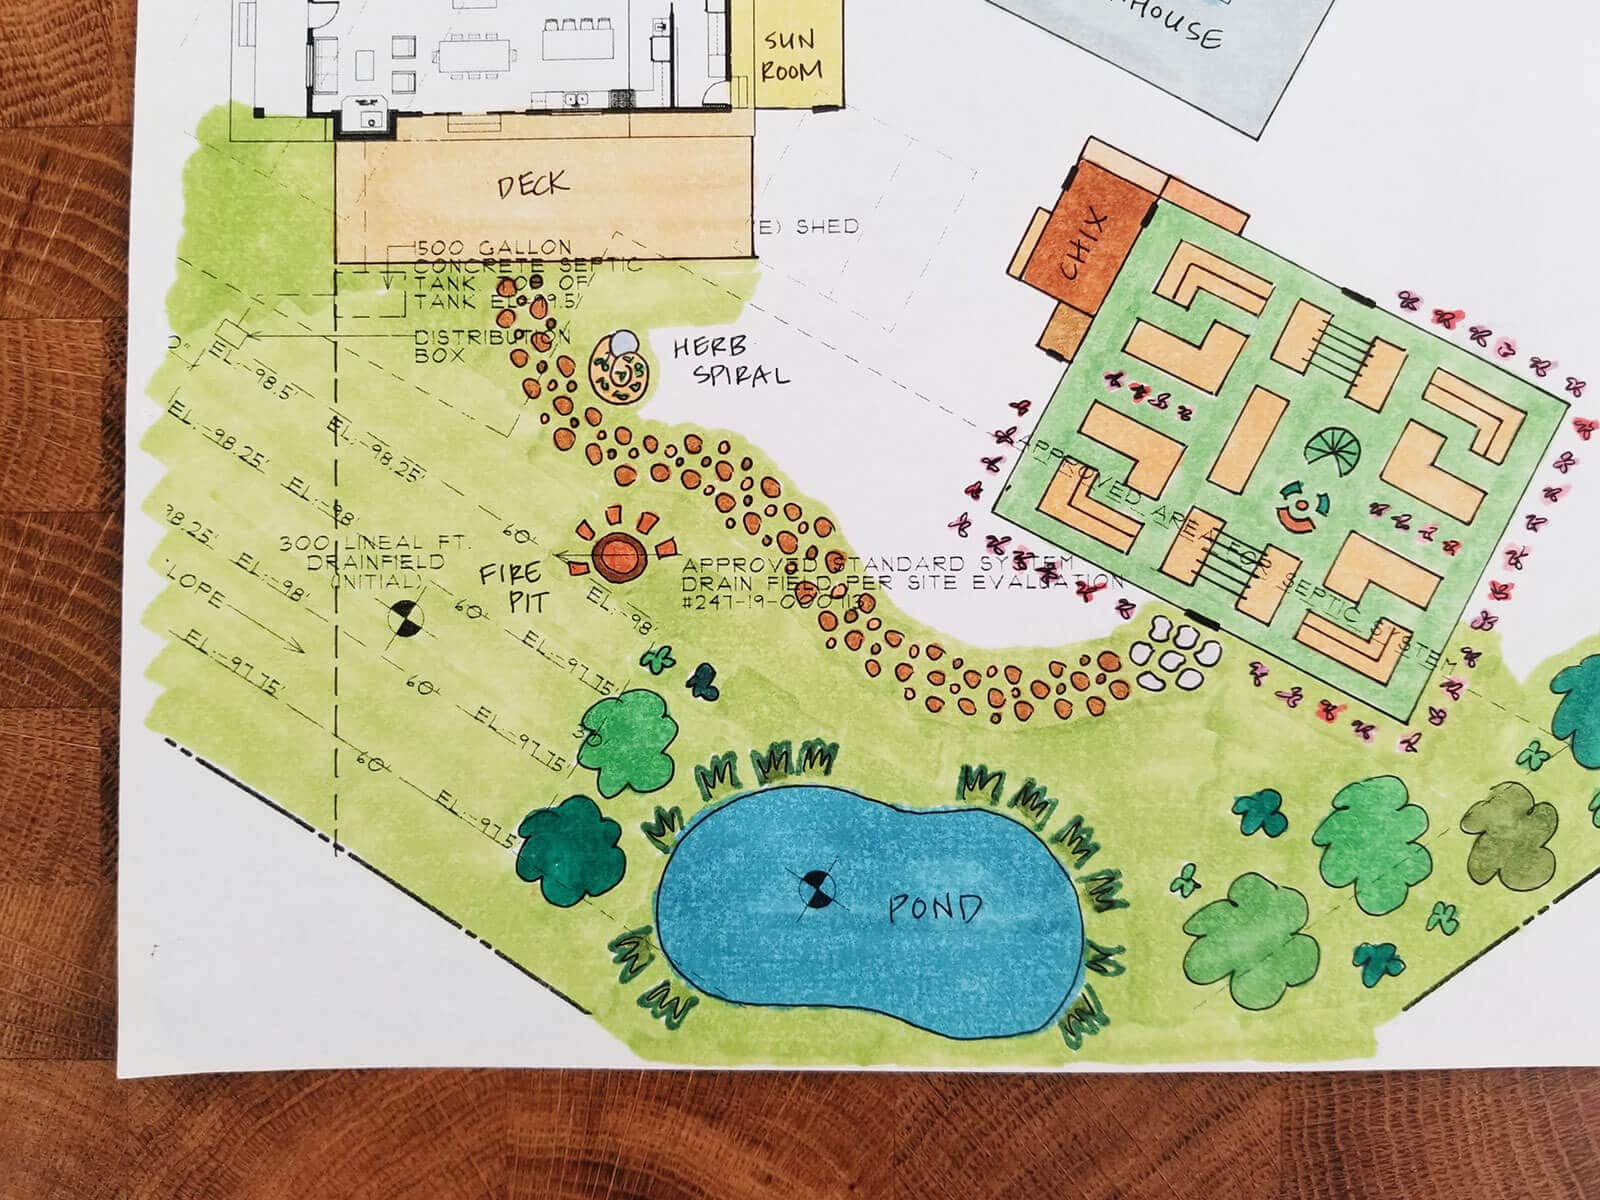 Close-up of color rendering showing locations of pond, fire pit, herb spiral, and foot path into the garden